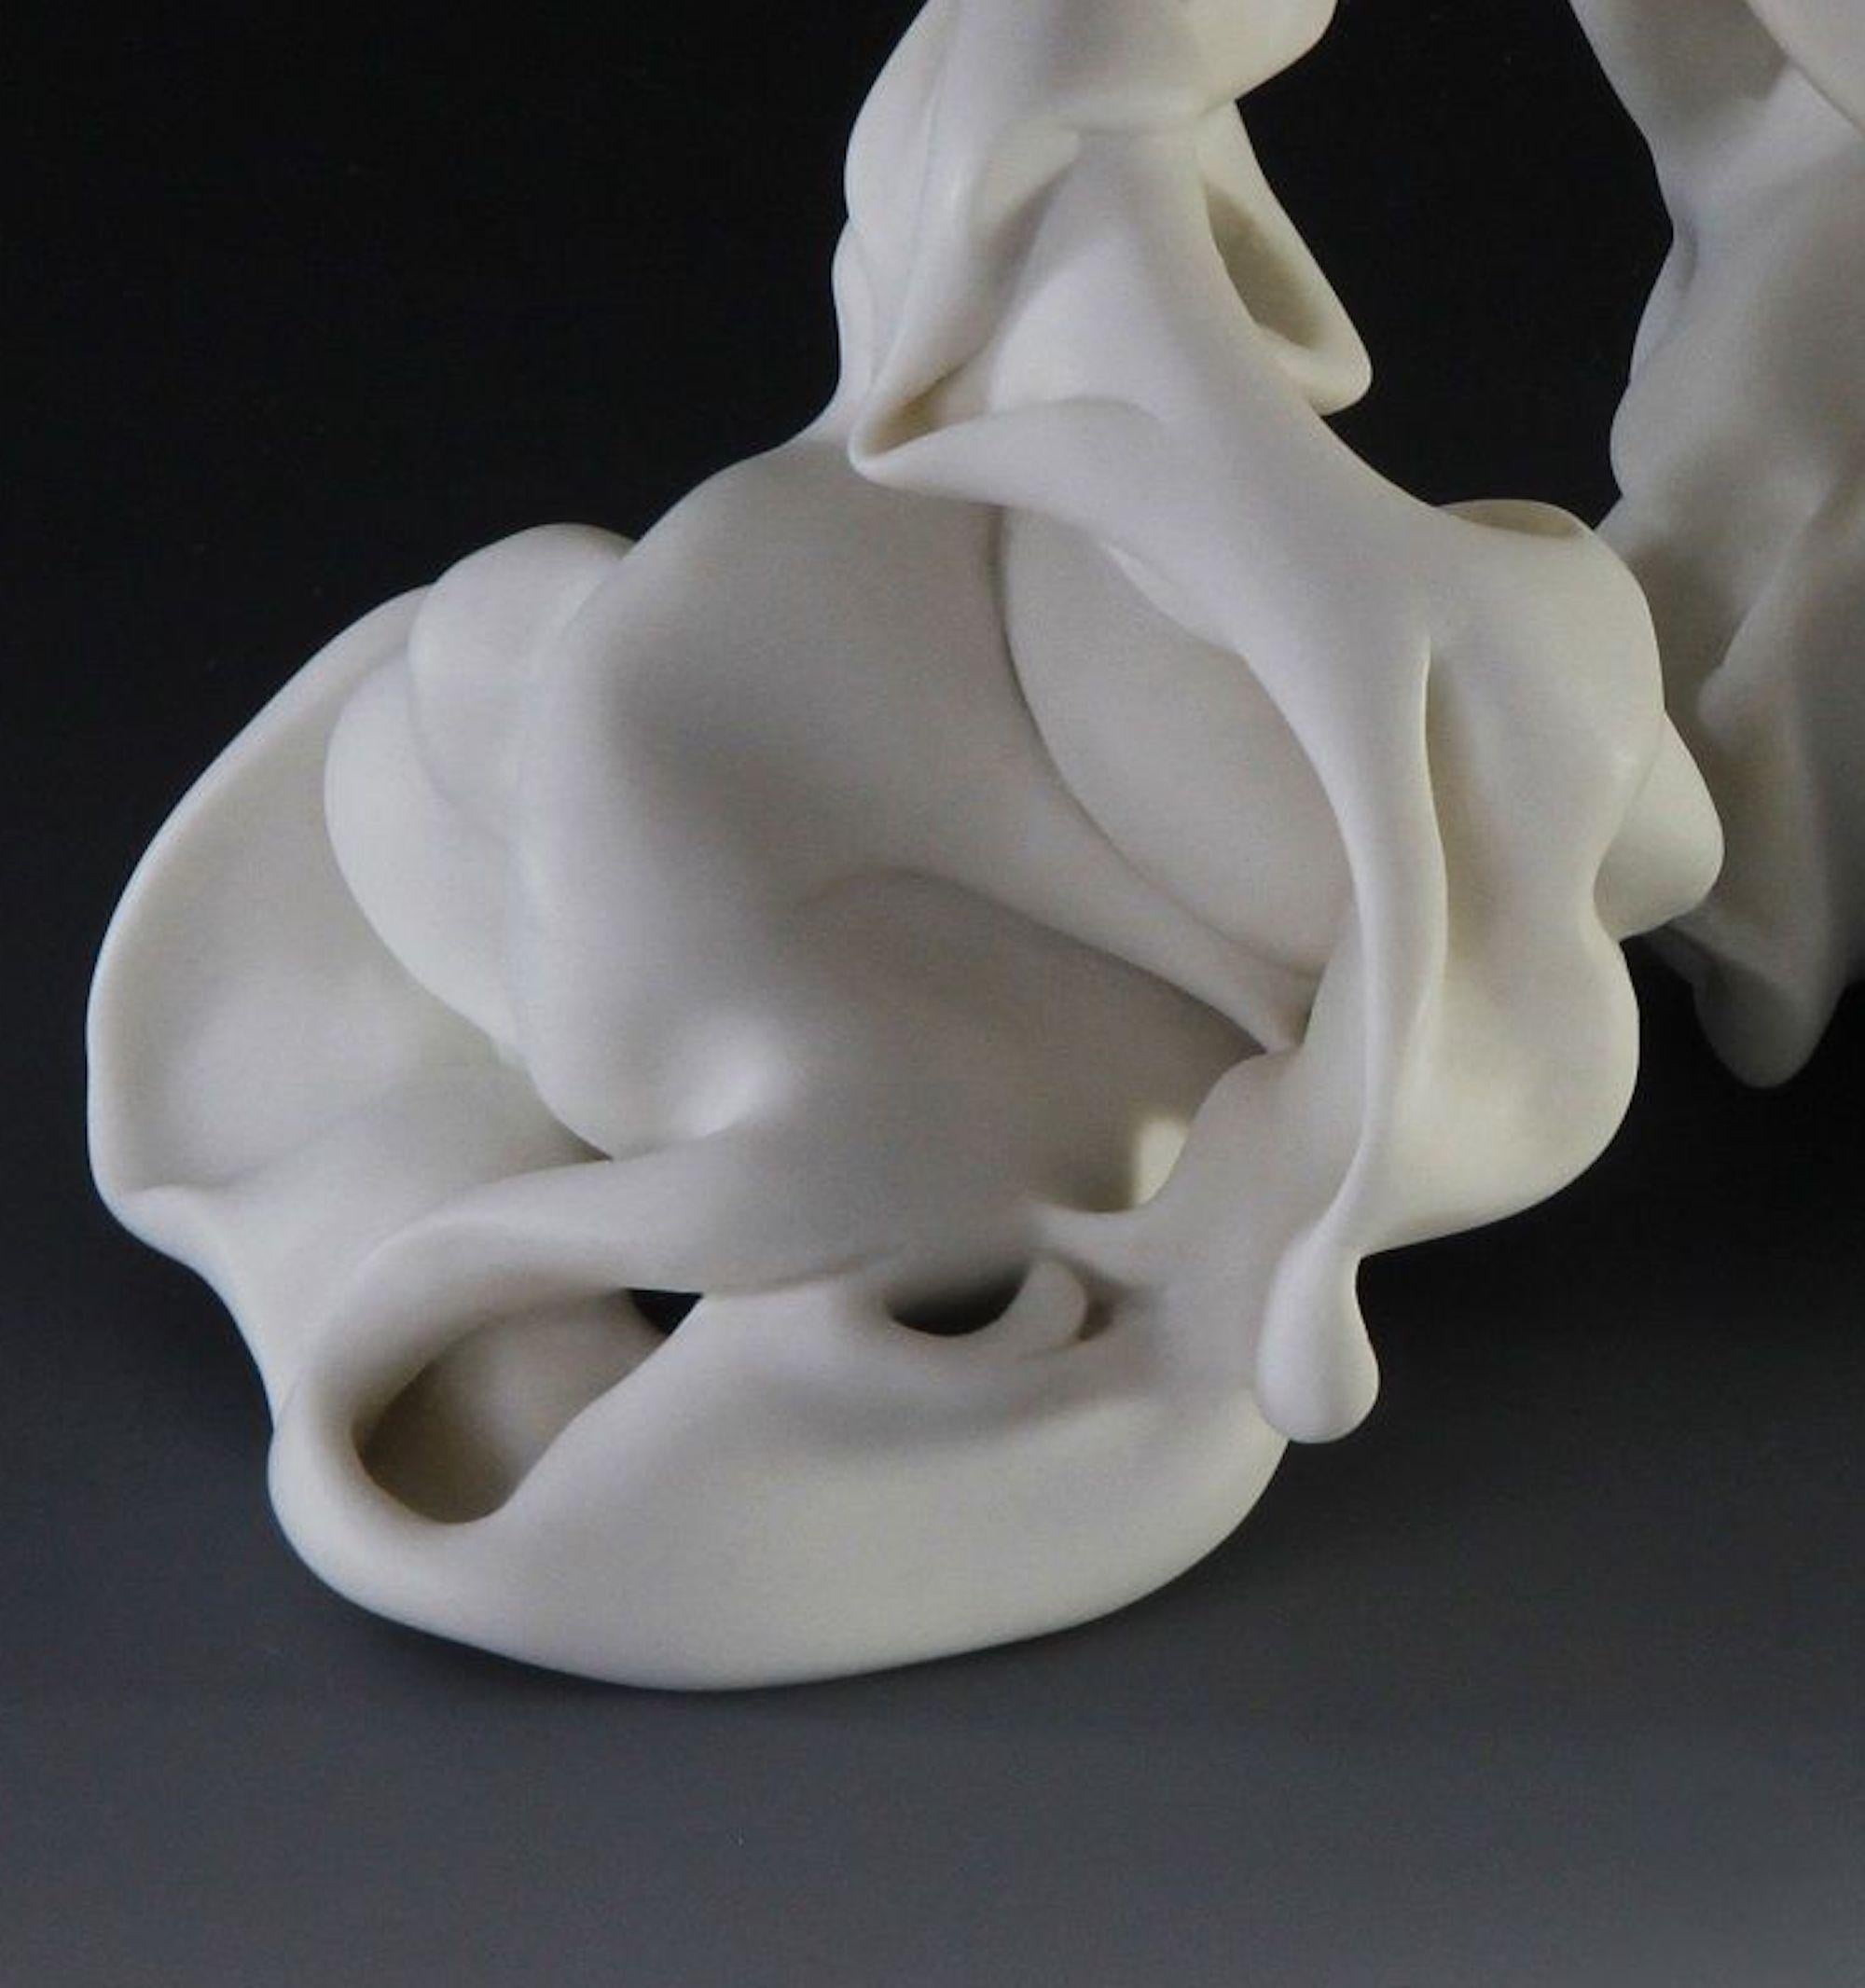 Hollows 3 by Sharon Brill - Abstract porcelain sculpture, organic forms, white For Sale 1